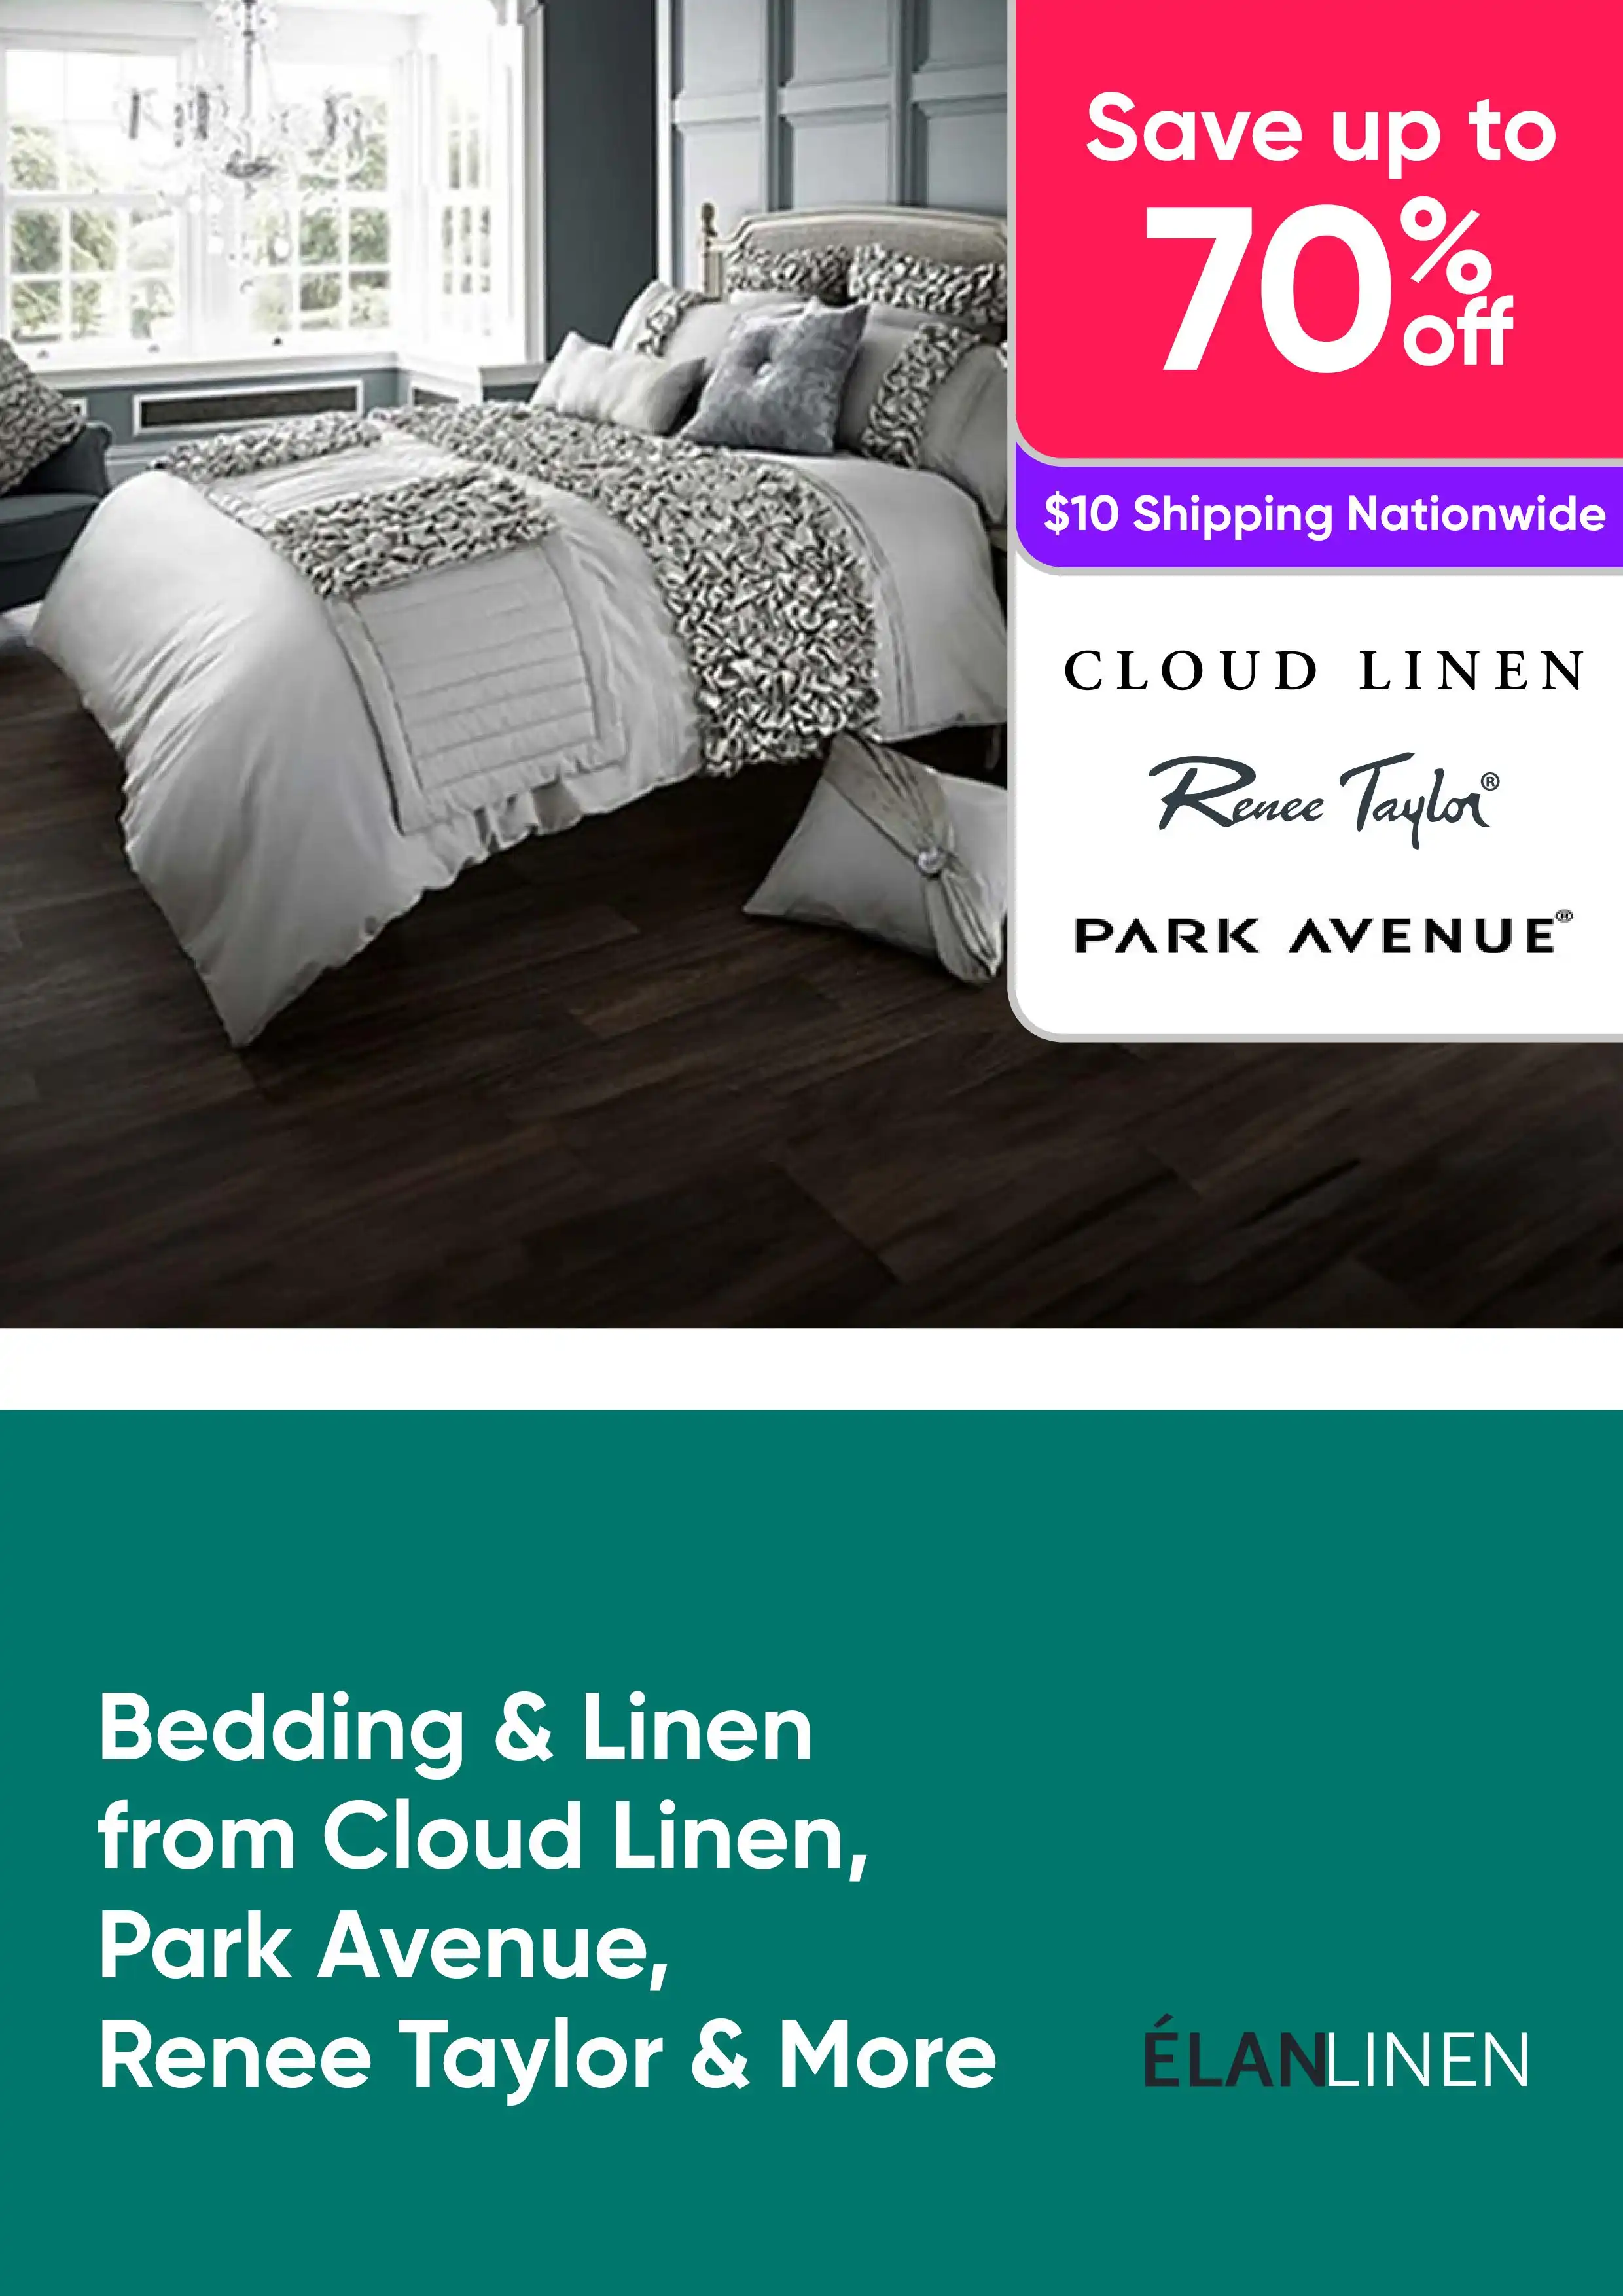 Up to 70% off Bedding & Linen from Cloud Linen, Park Avenue, Renee Taylor